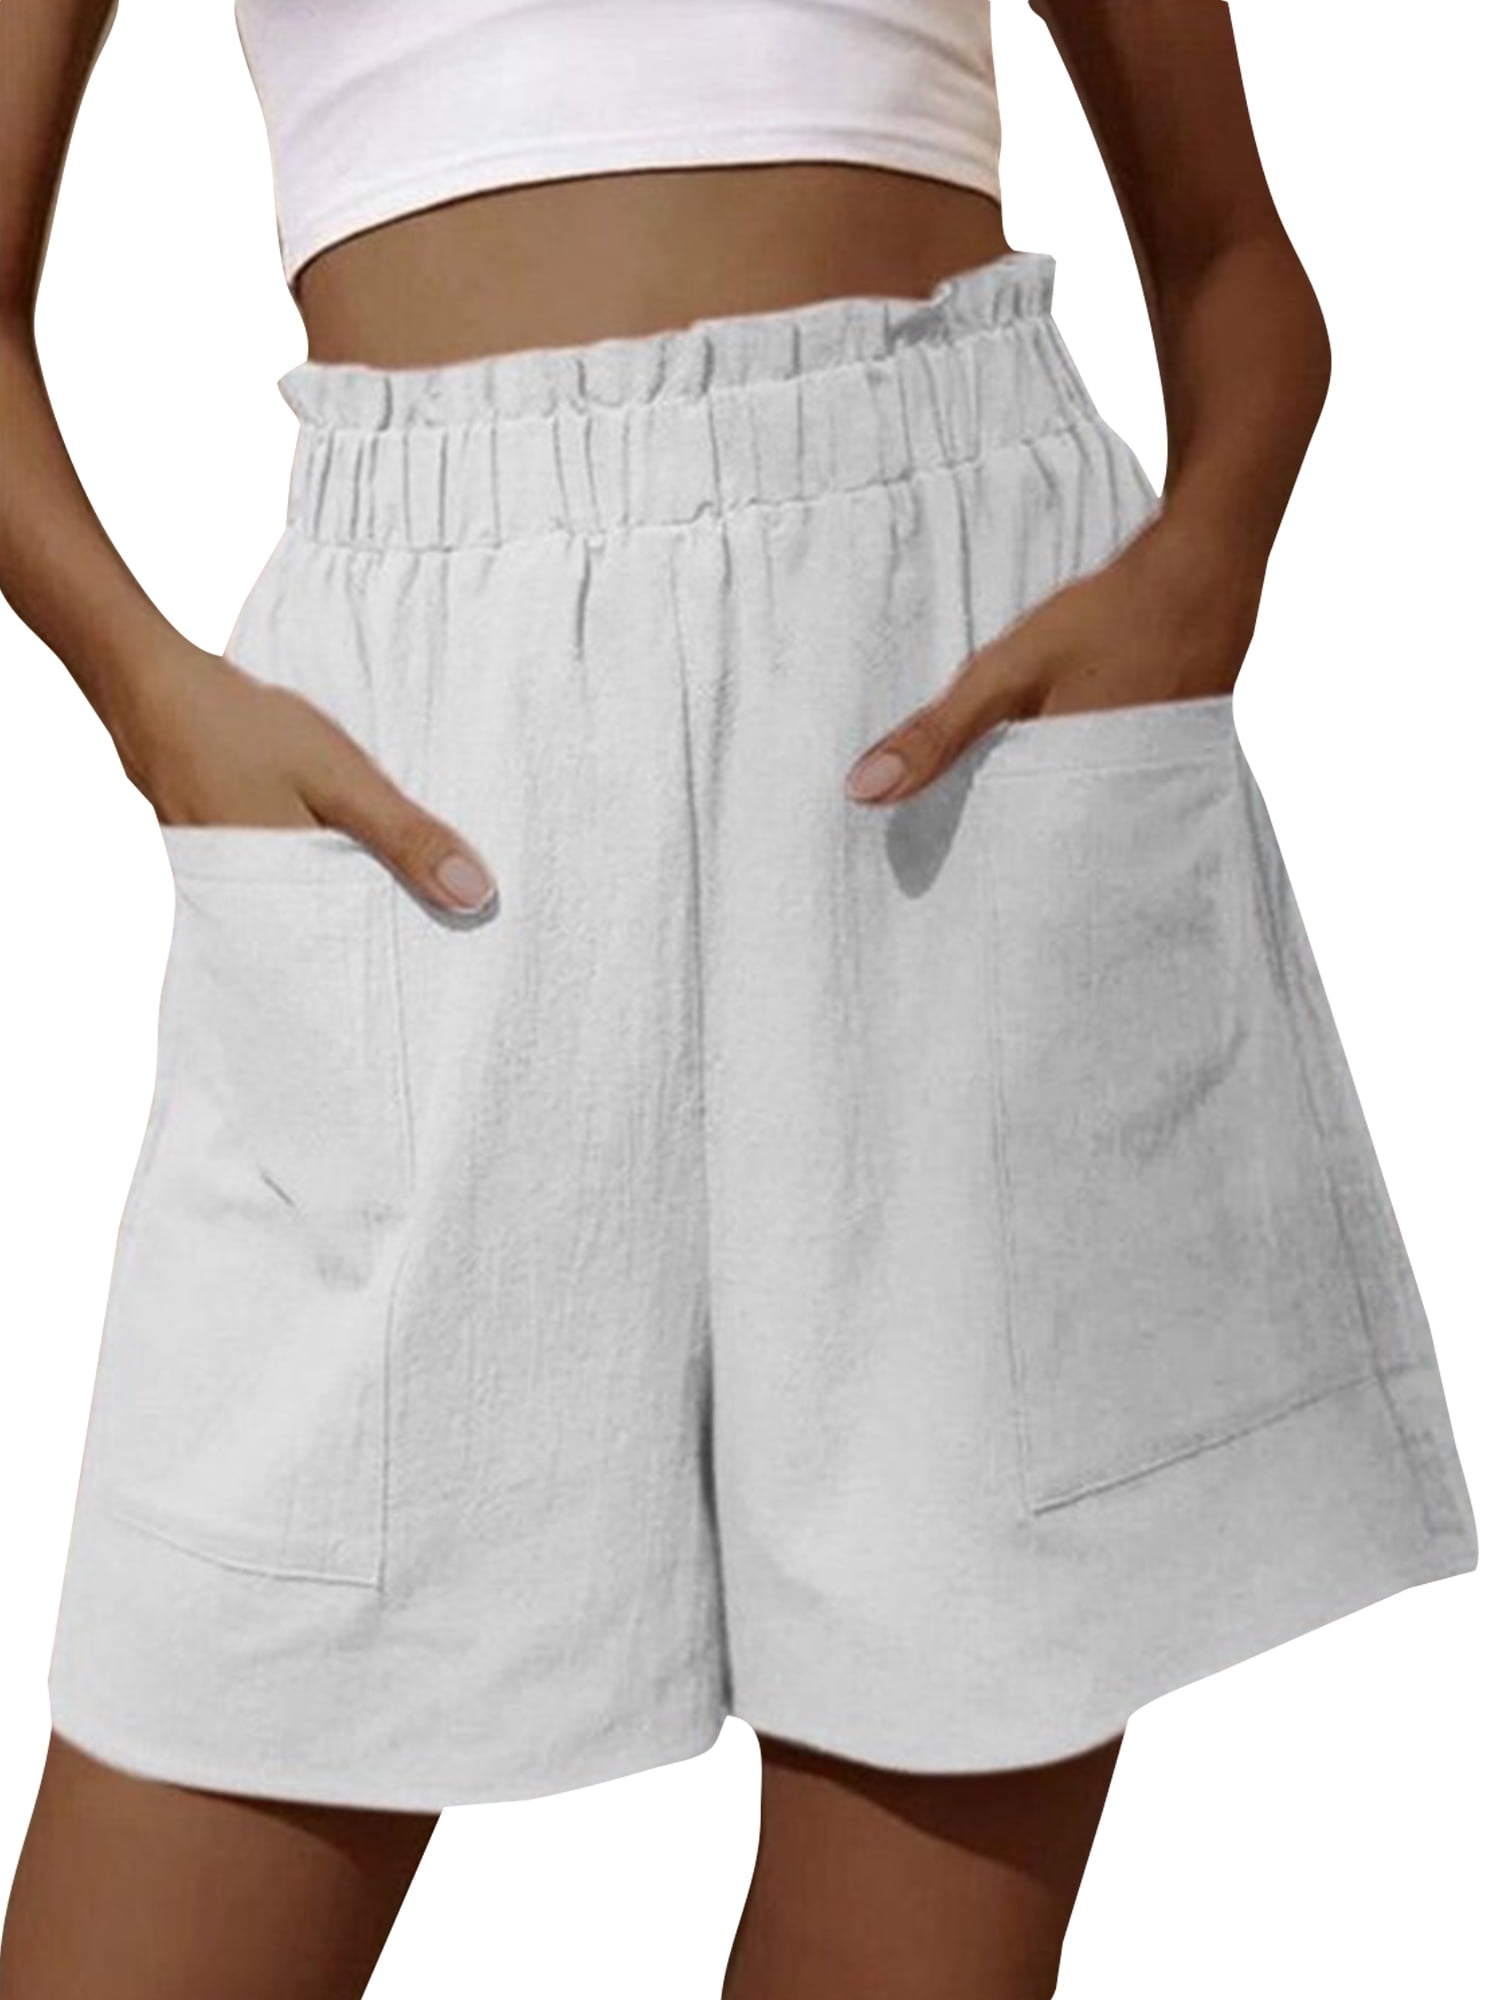 Ladies or Womens Hot PantsShorts Large  Free Size 2834 Waists Blue   White Colour  Amazonin Clothing  Accessories